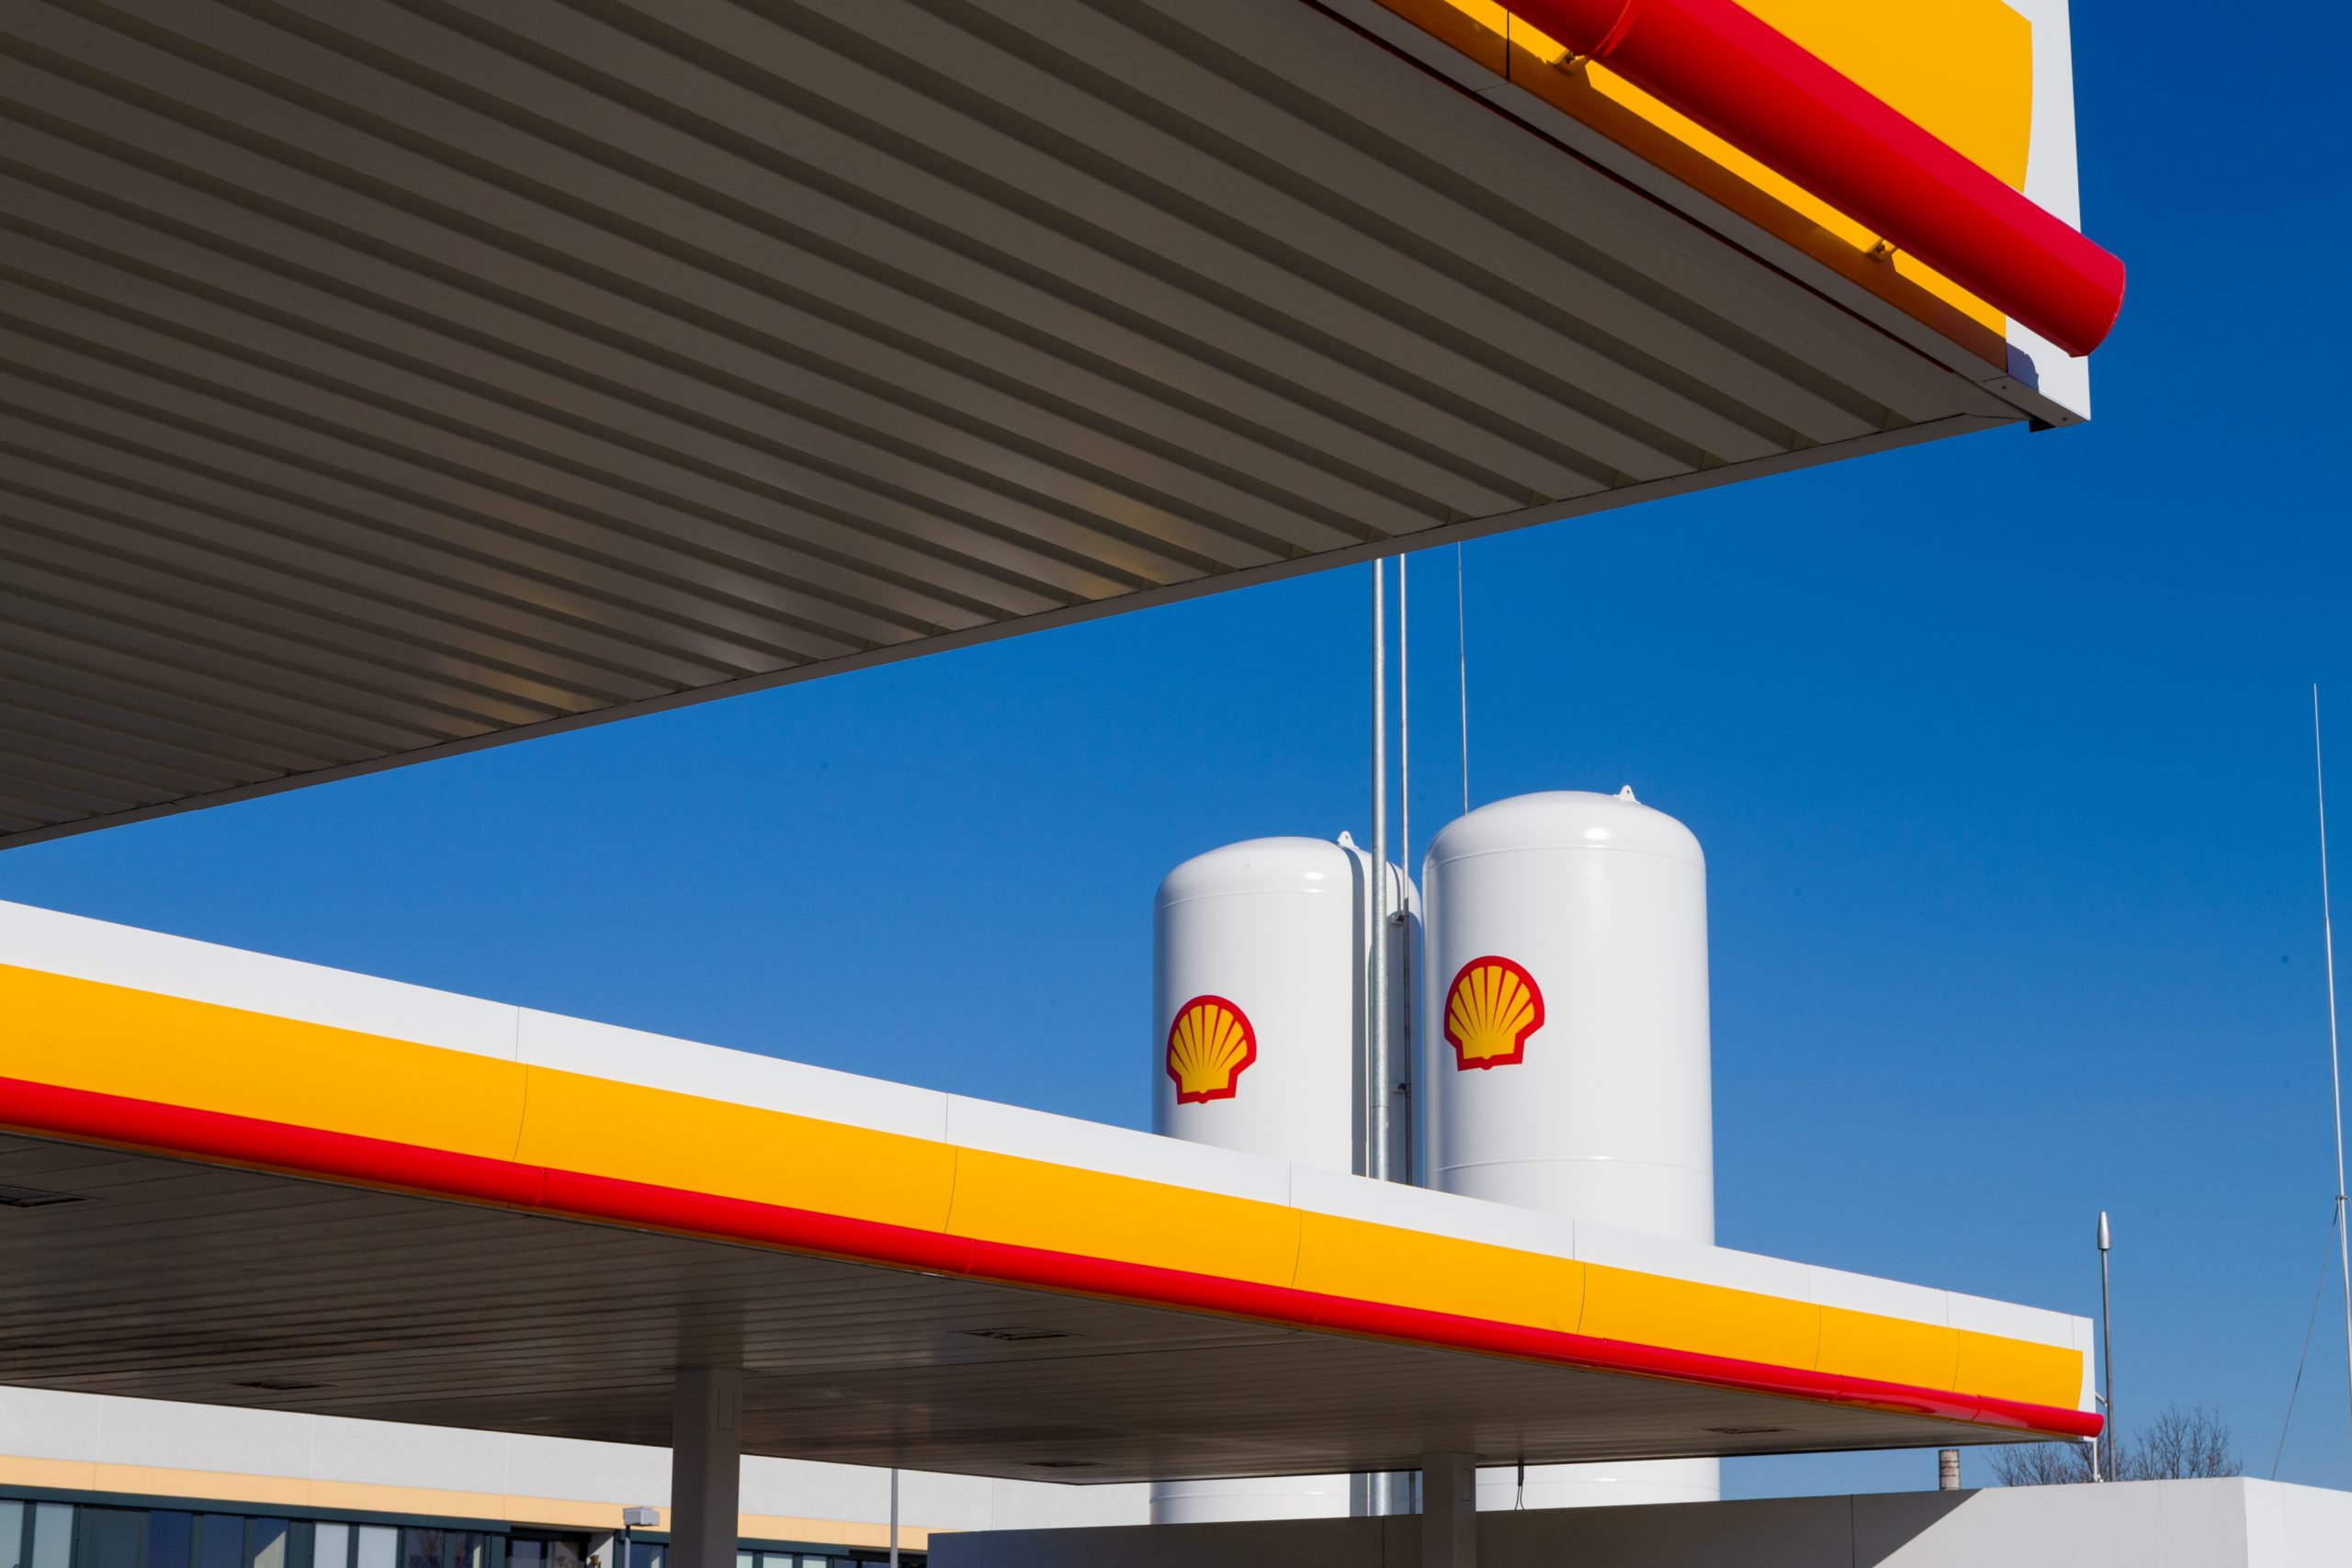 Shell expects 'significantly' higher LNG trading results in Q4